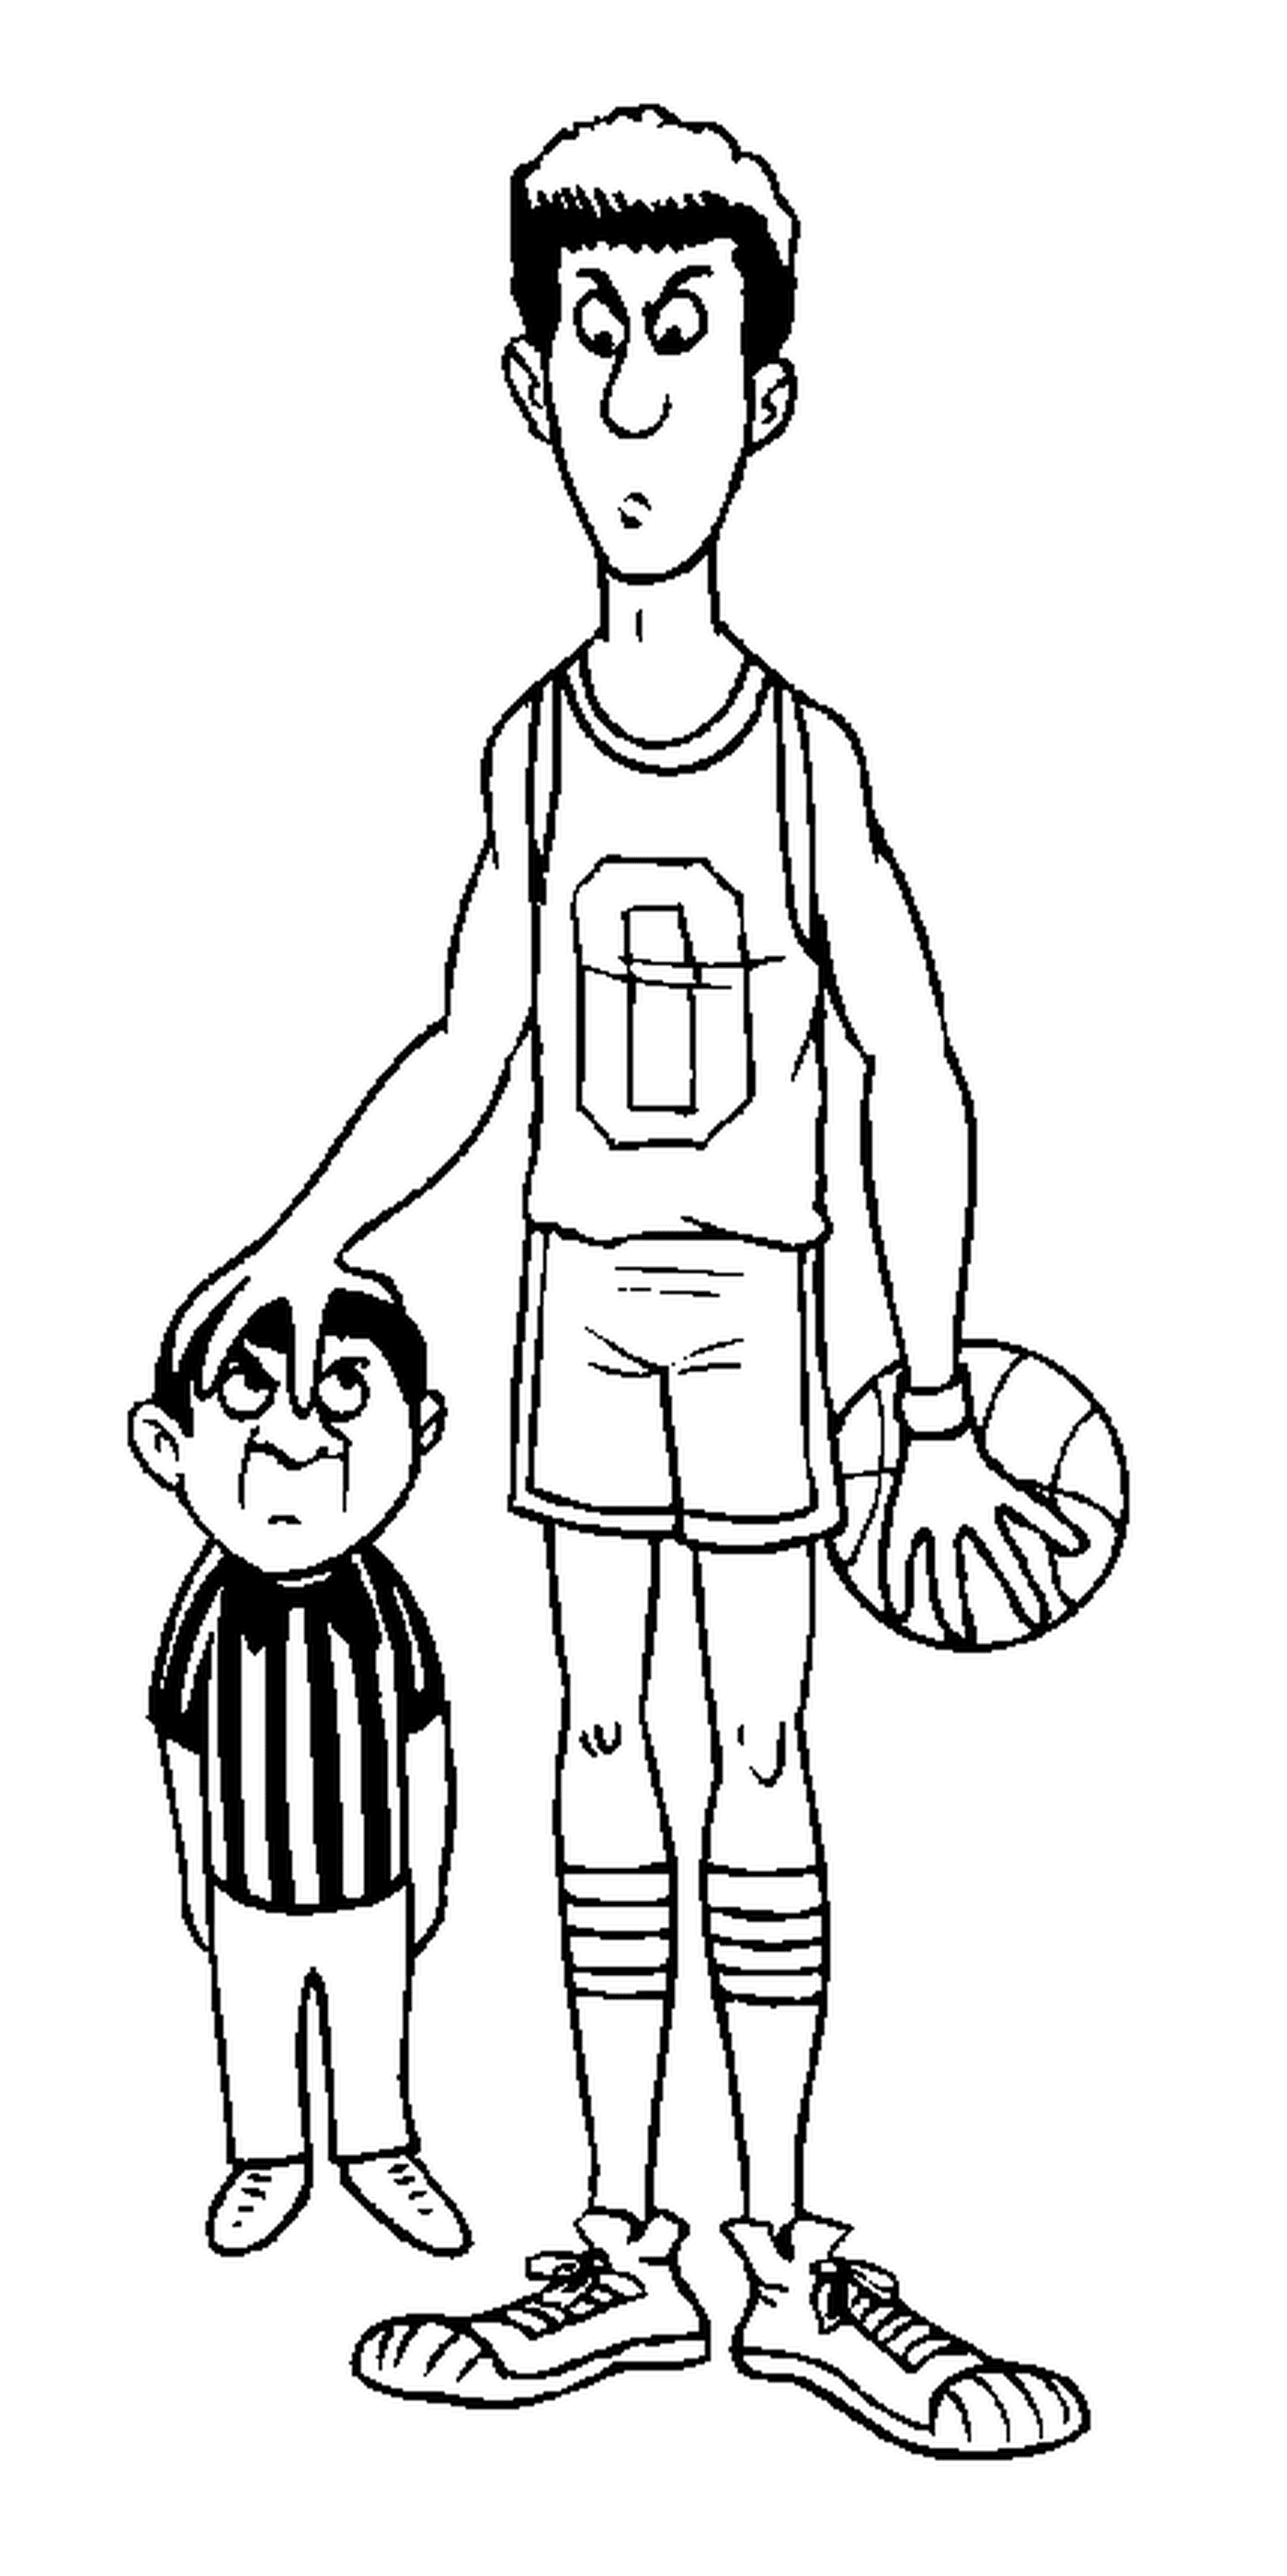  A basketball player with a little referee 